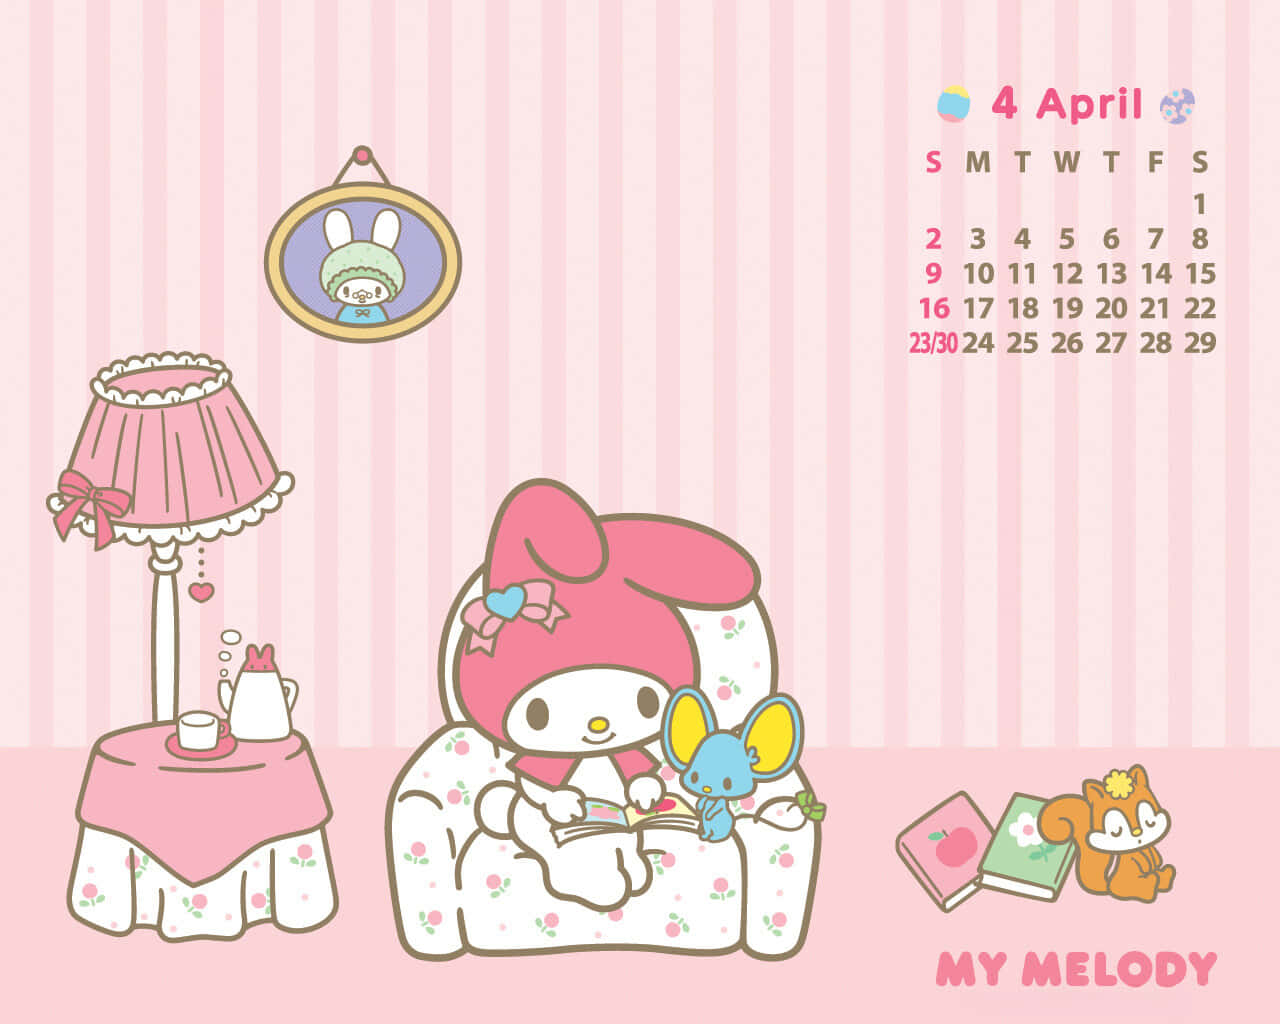 Get your Sanrio fix with these awesome wallpapers!